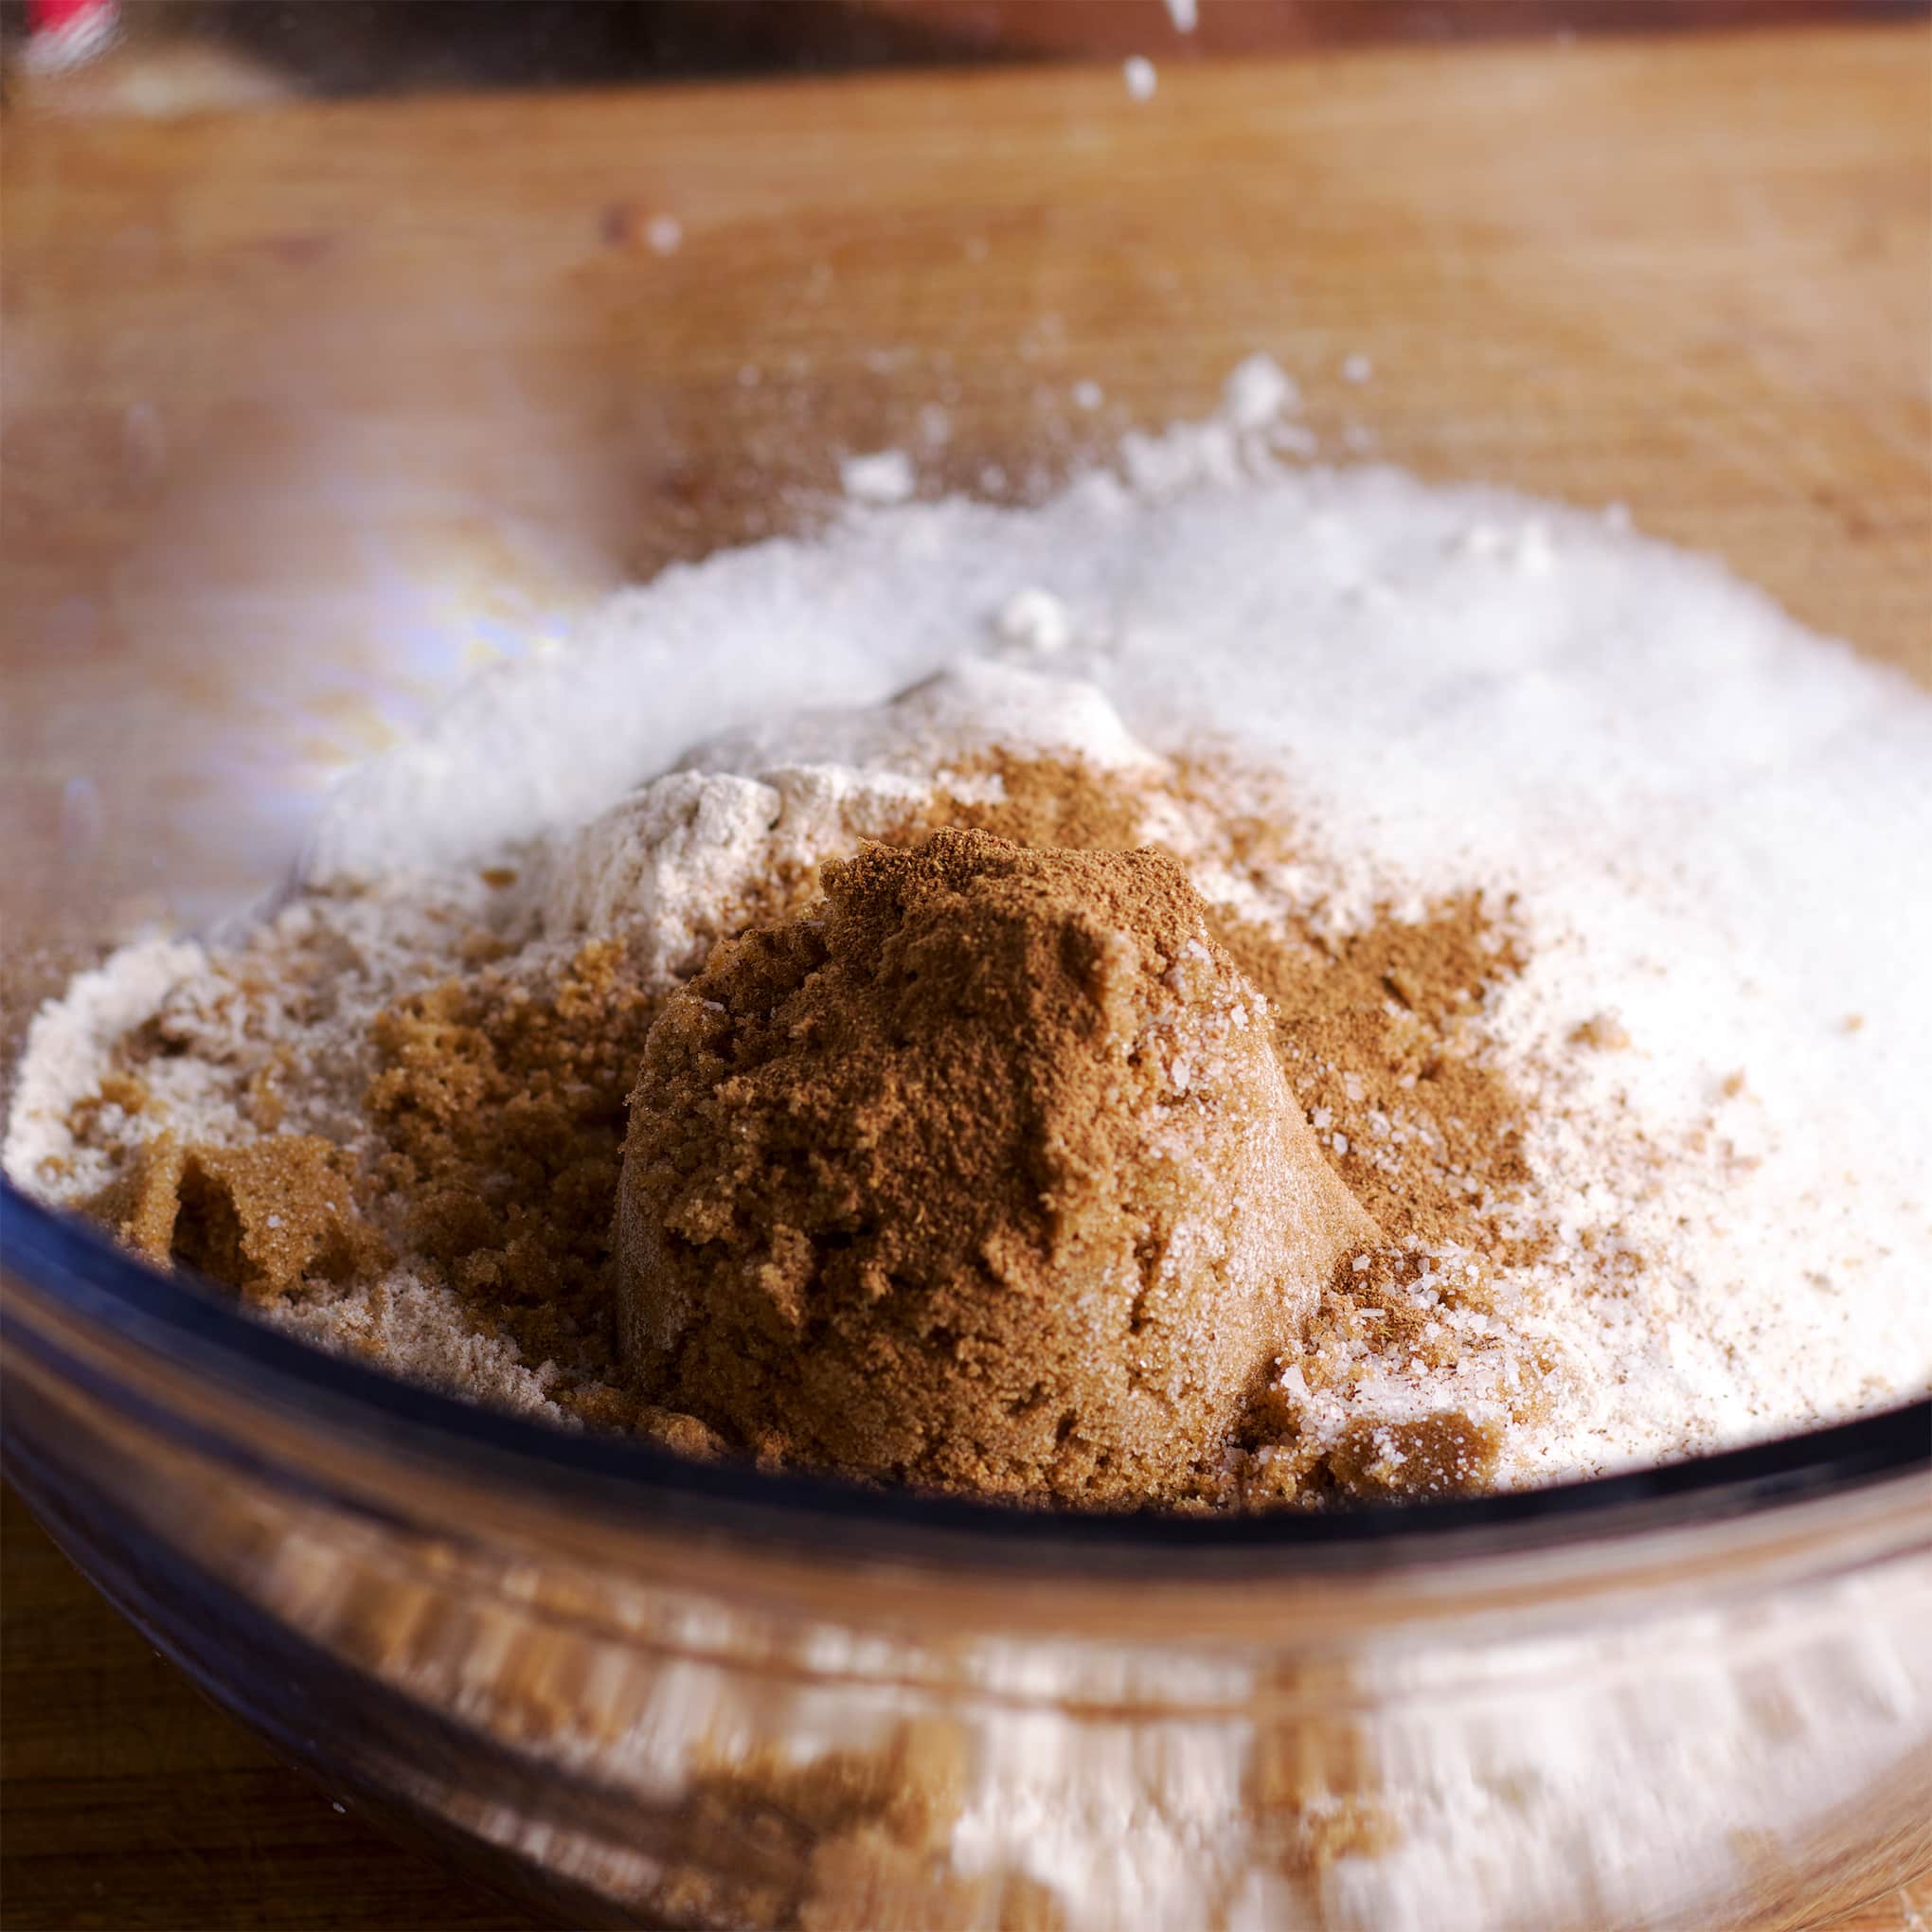 A glass bowl containing the dry ingredients needed to make a crumb topping.